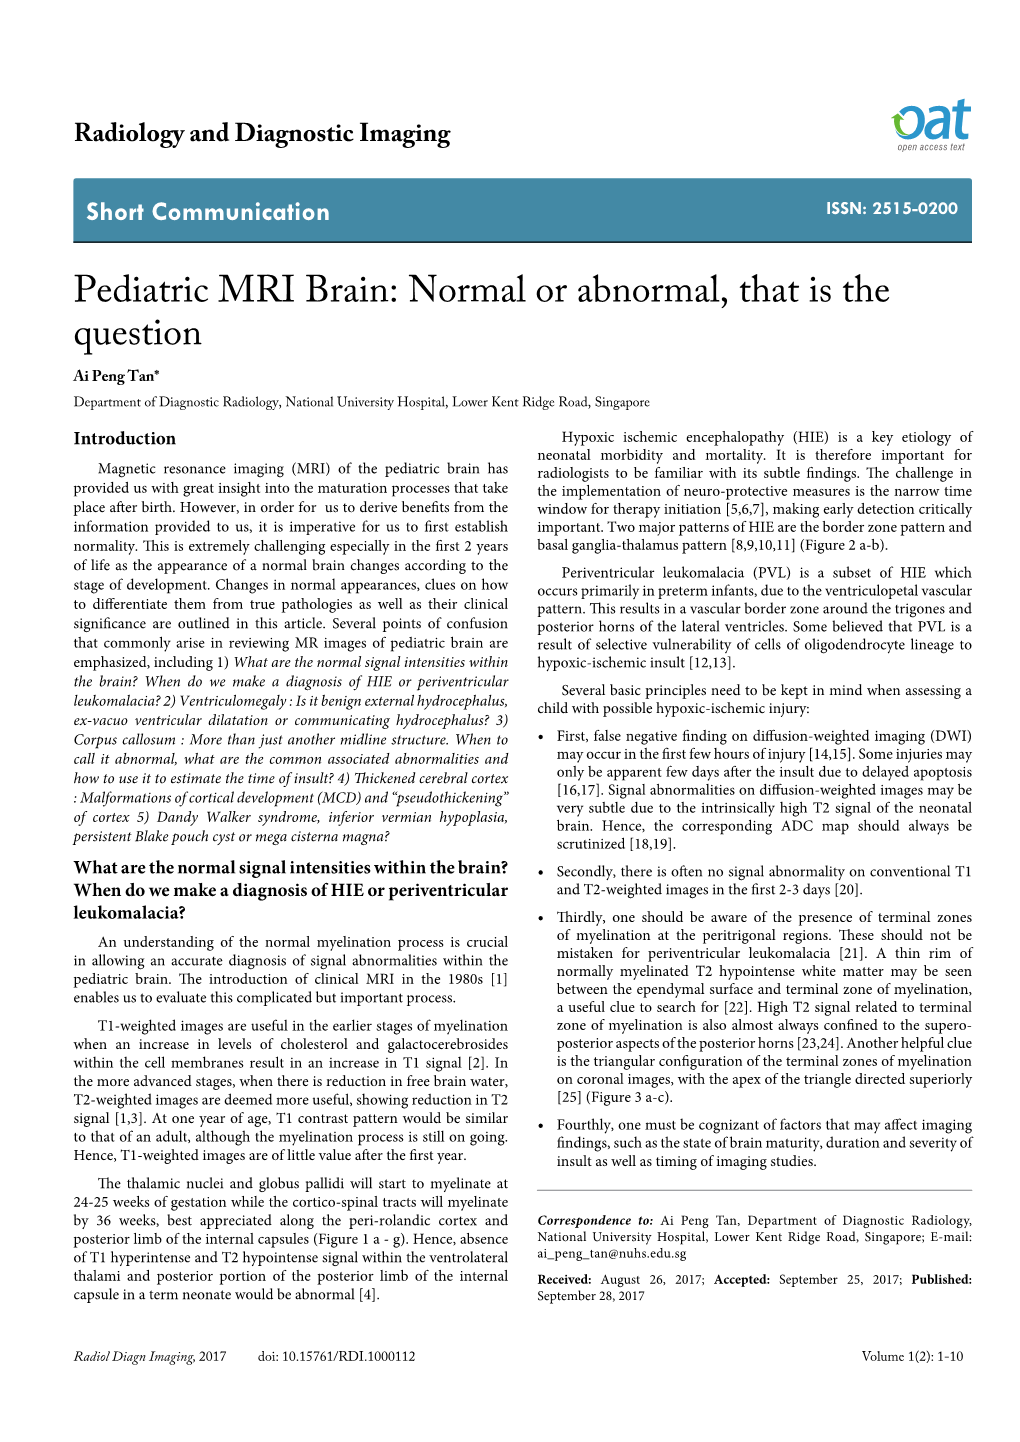 Pediatric MRI Brain: Normal Or Abnormal, That Is the Question